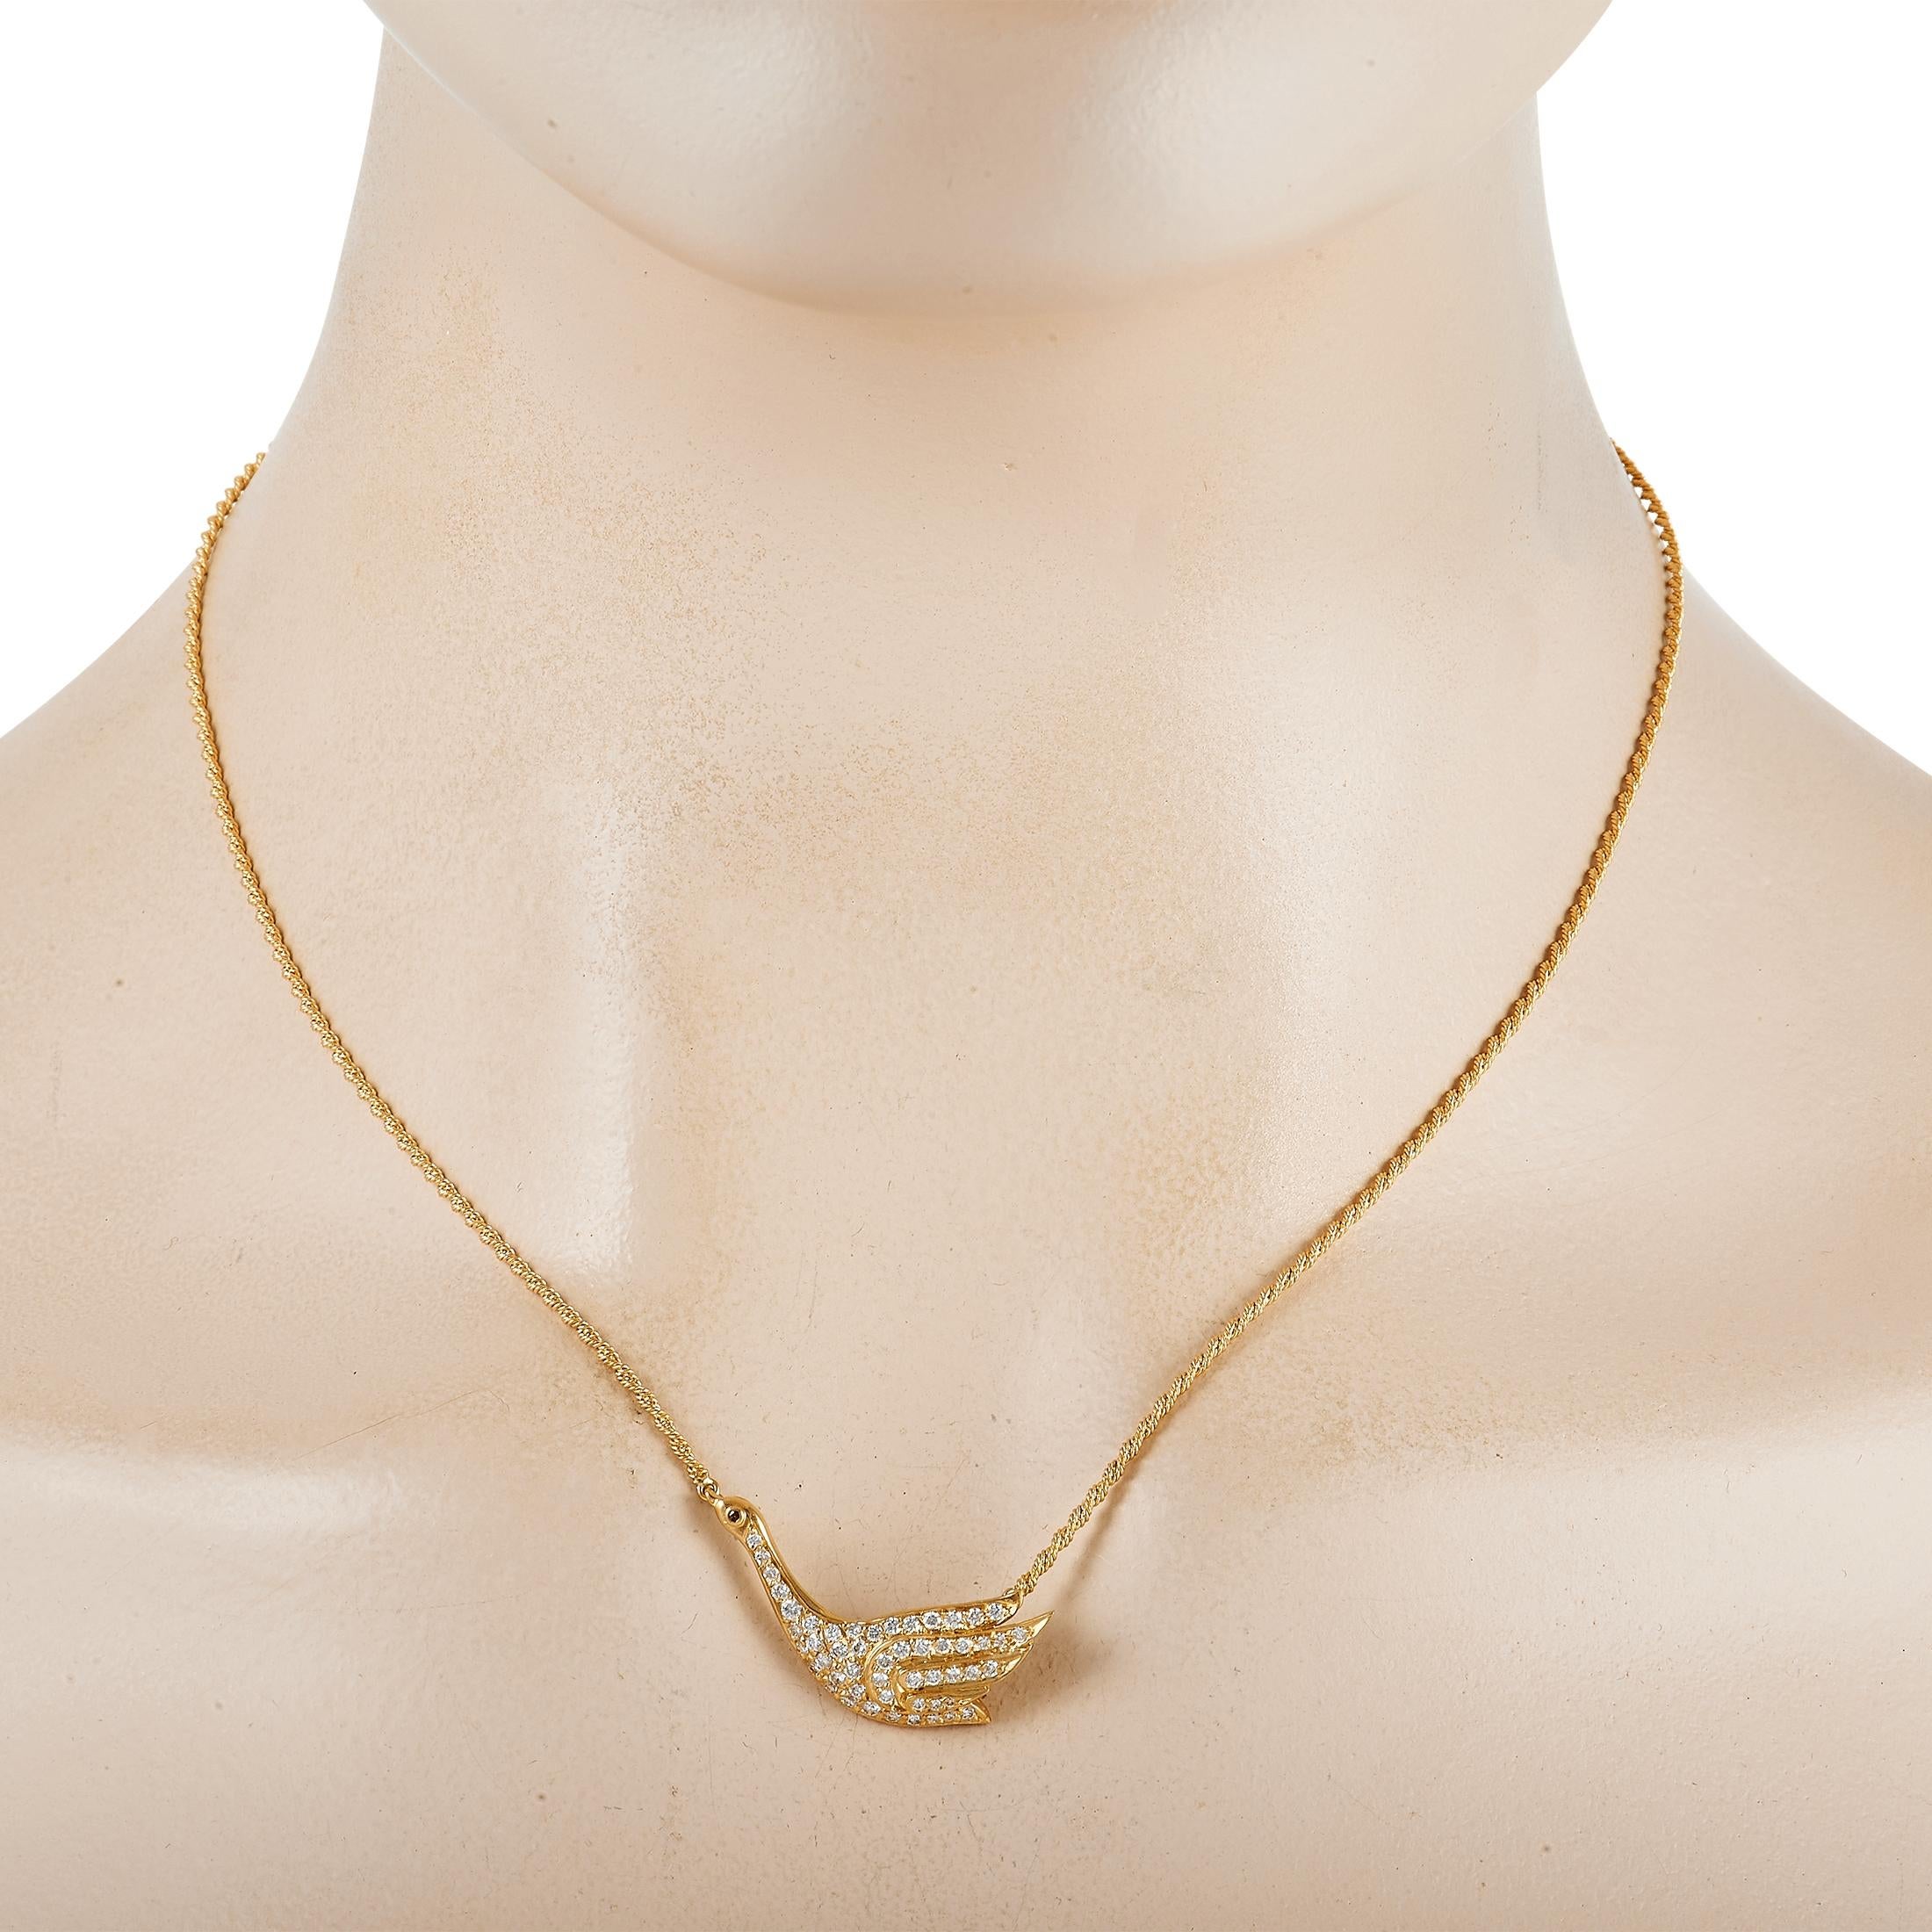 This 18K Yellow Gold Graff necklace is simply exquisite. Suspended at the center of a textured chain measuring 16” long, you’ll find a charming swan-shaped pendant measuring 1” long and 0.5” wide. It sparkles to life thanks to an array of inset